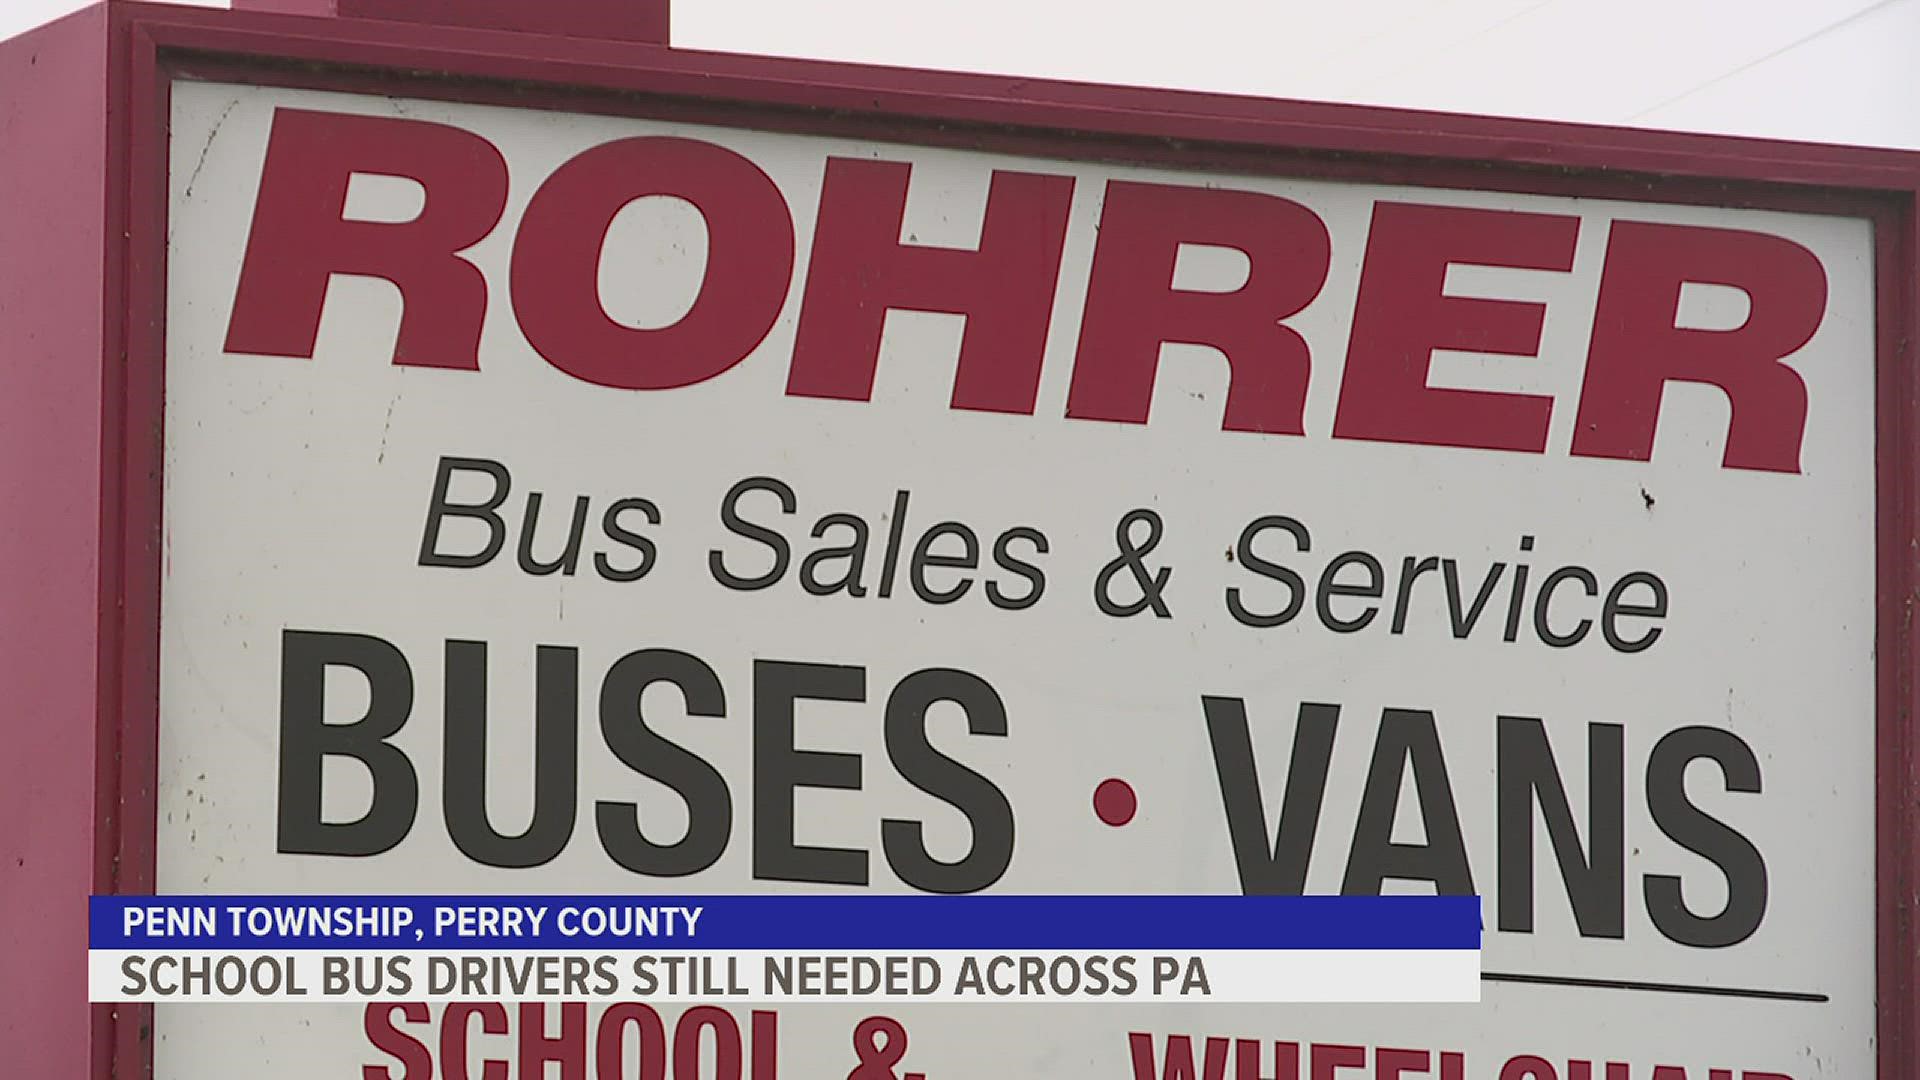 Open bus driver positions have been cut in half over the past year, but officials say there are still plenty of openings across the education workforce.